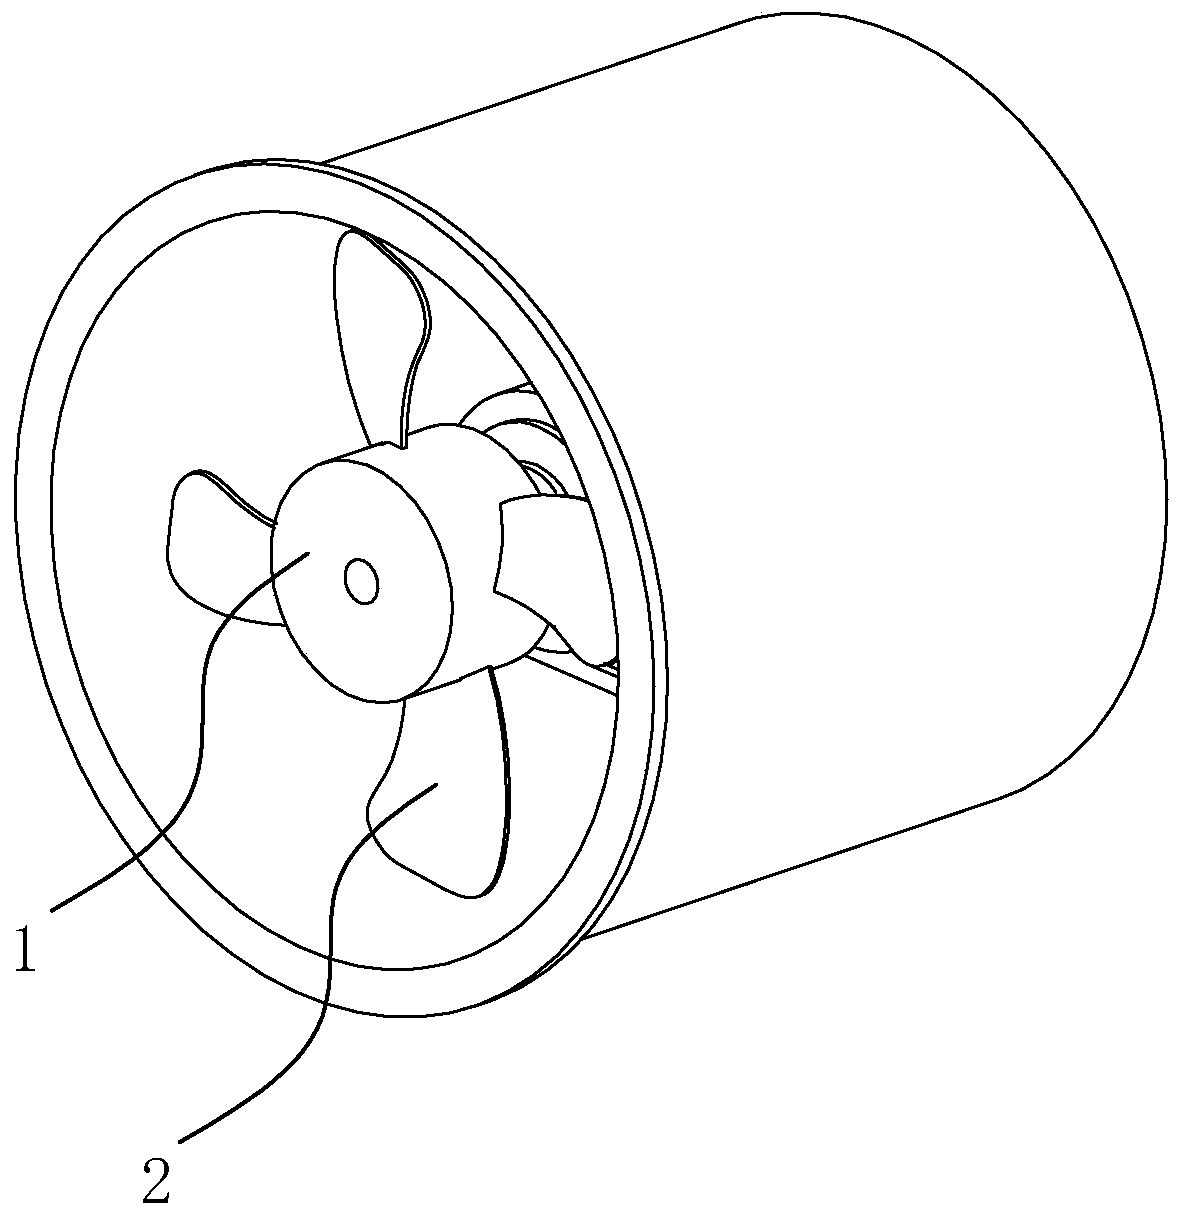 Axial flow fan with adjustable blades